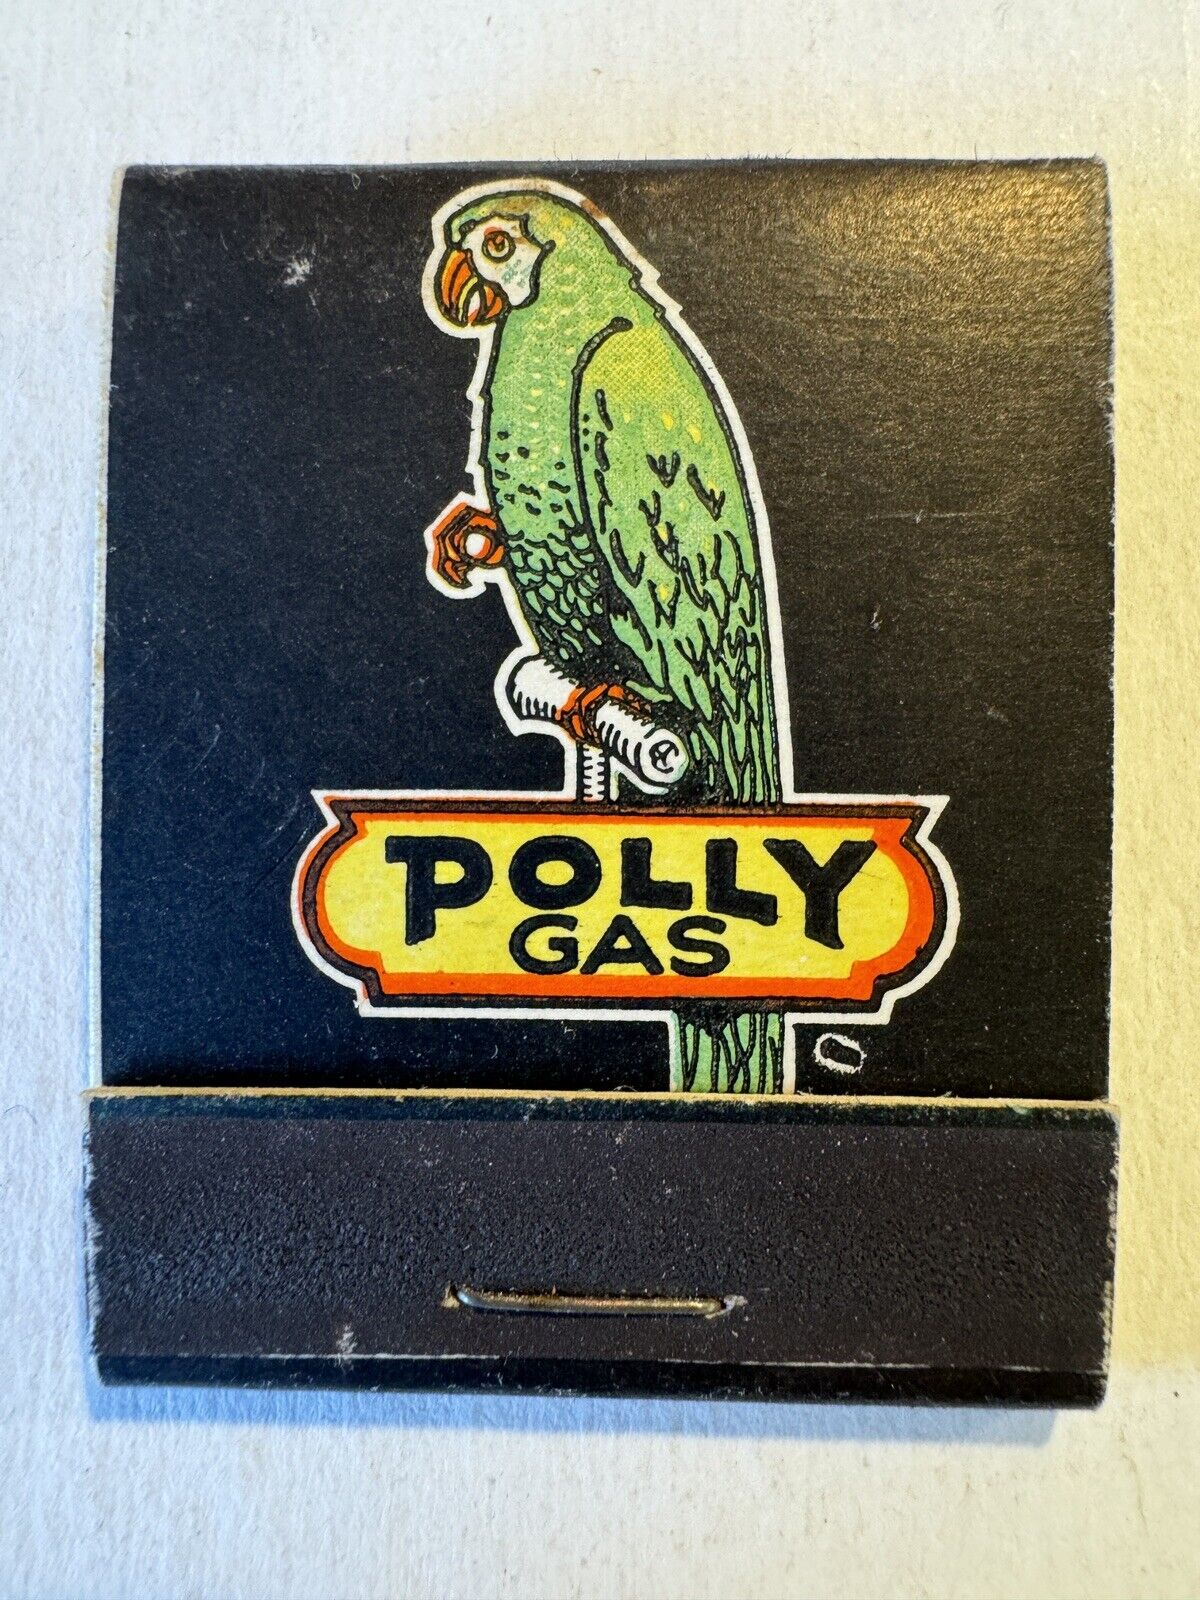 POLLY GAS Wilshire Products POLLY PENN MOTOR OIL Advertising Matchbook Unstruck